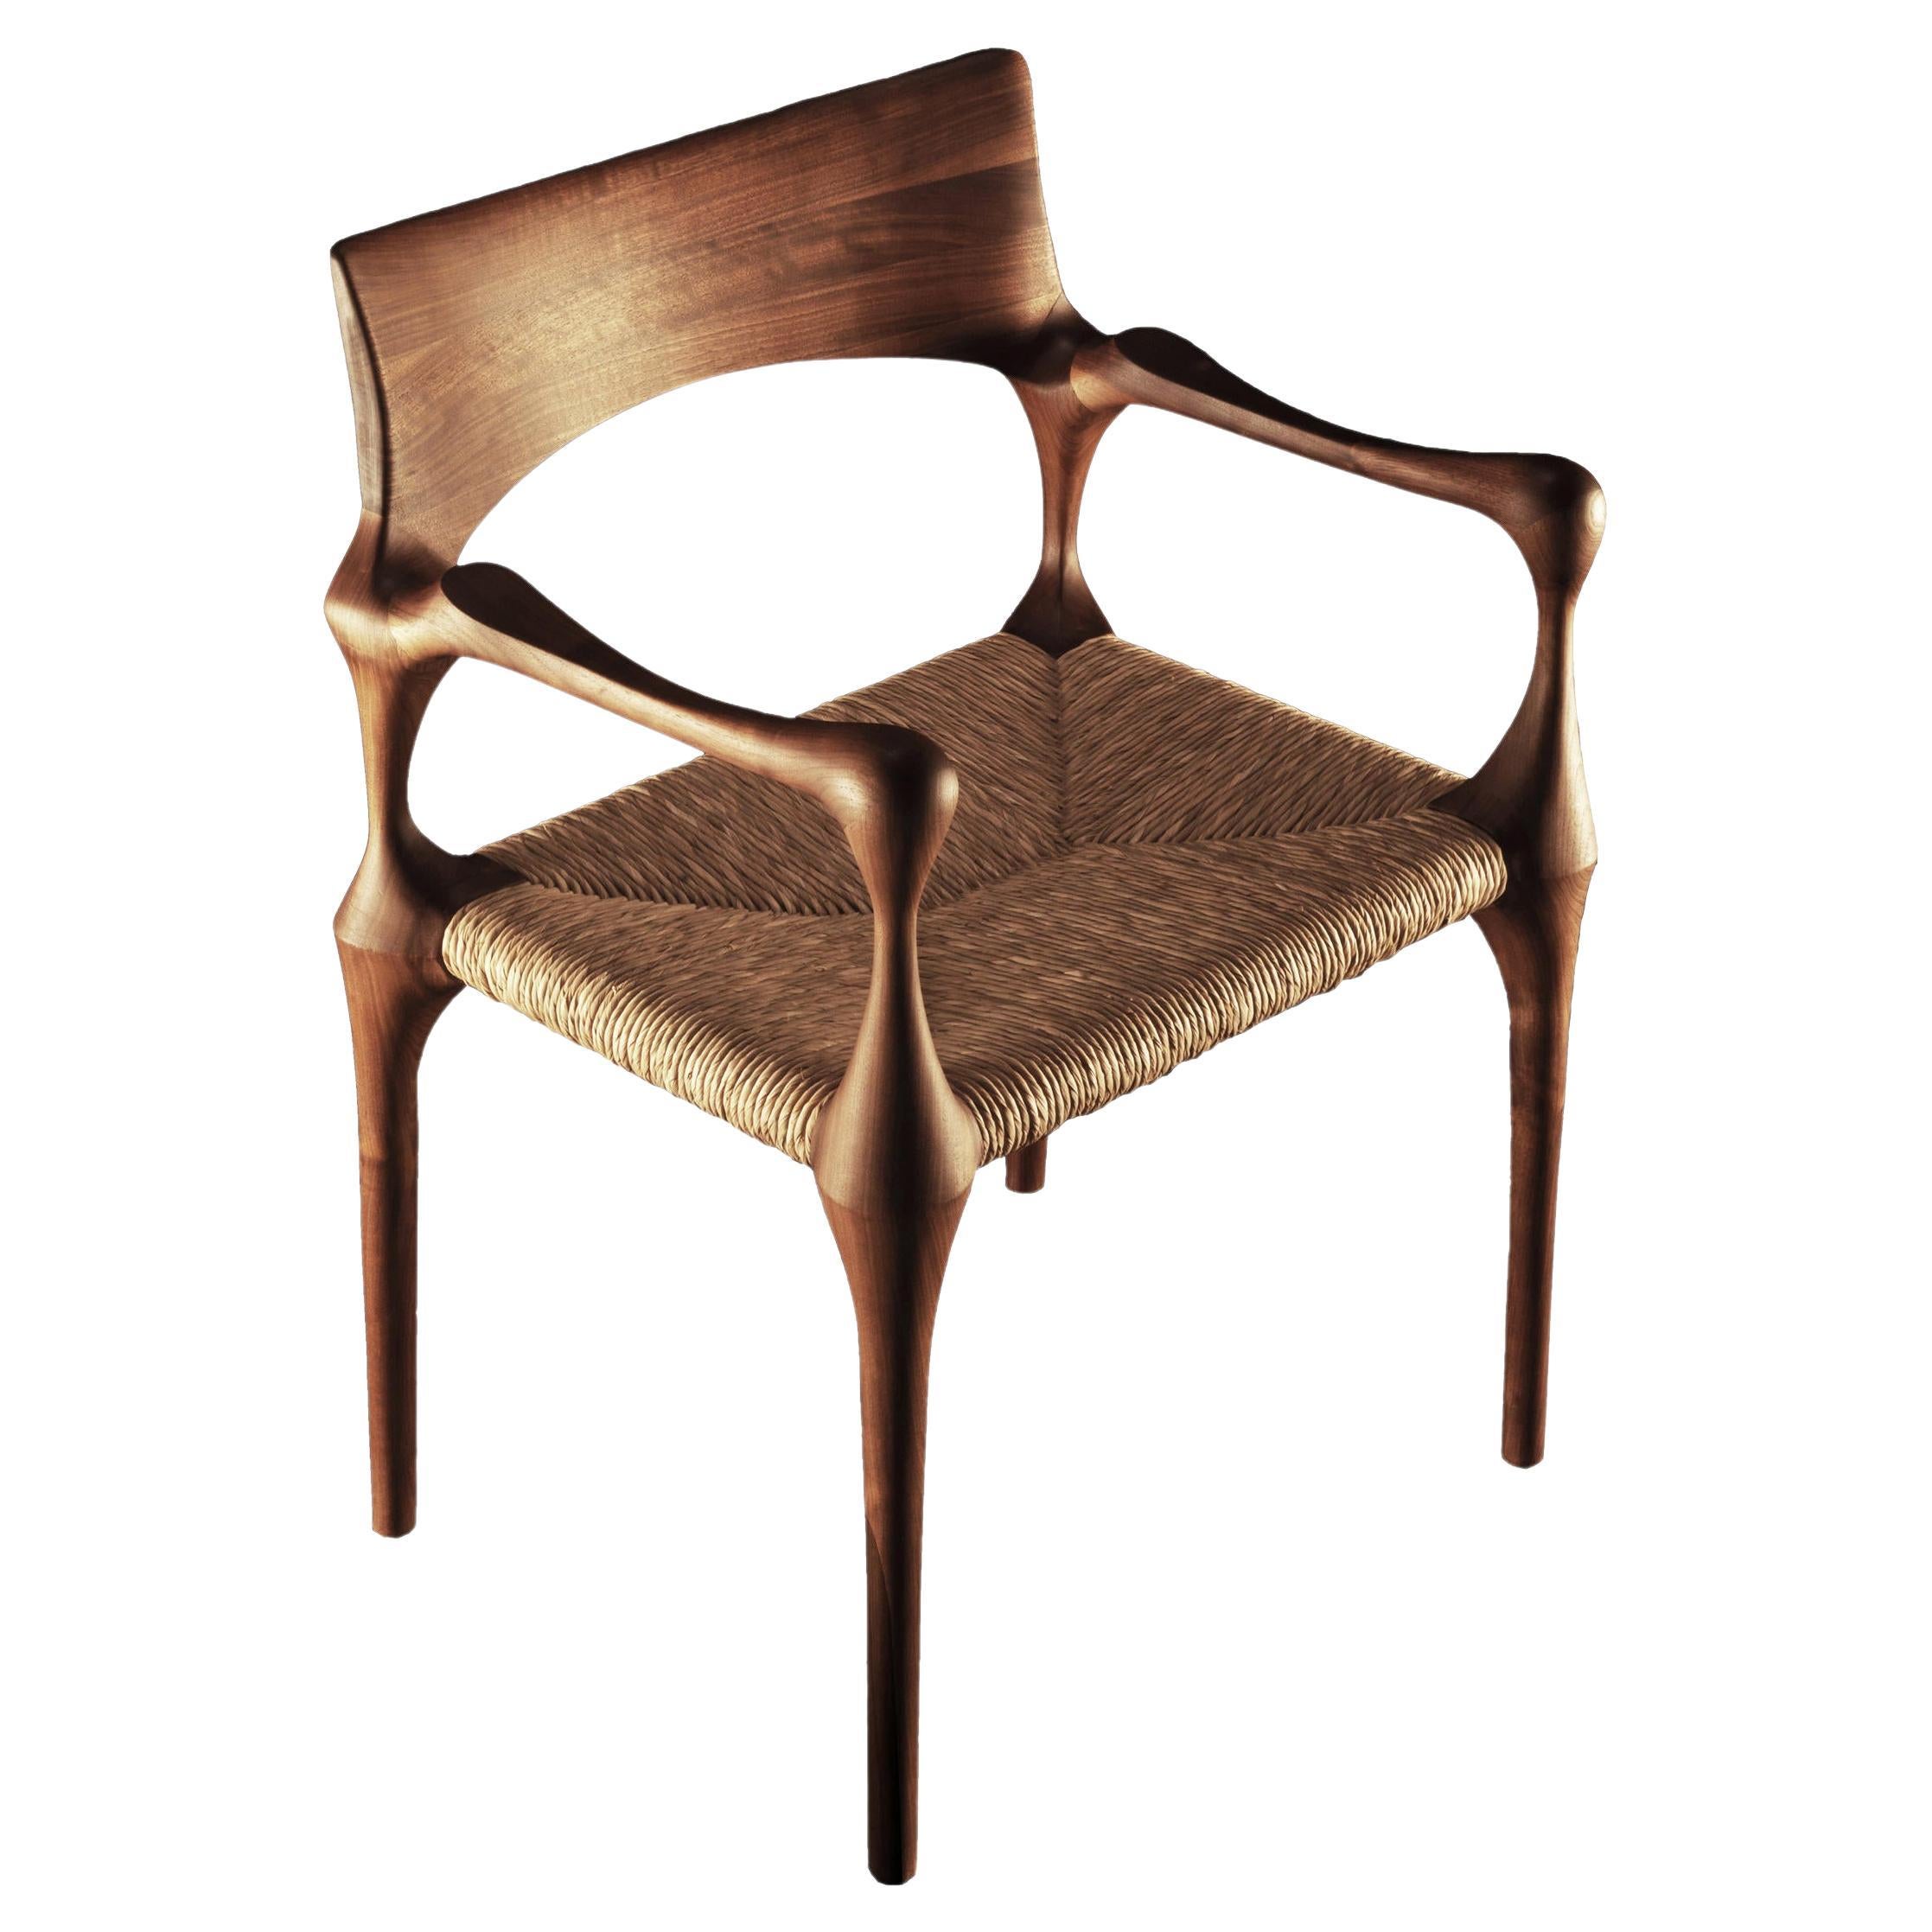 This chair has a very simple shape, but its peculiarity lies in the different thickness and sections that the different lines of its structure draw. Sometimes the line is wide, others it is thin, and sometimes it is rounded or flat. The line of its